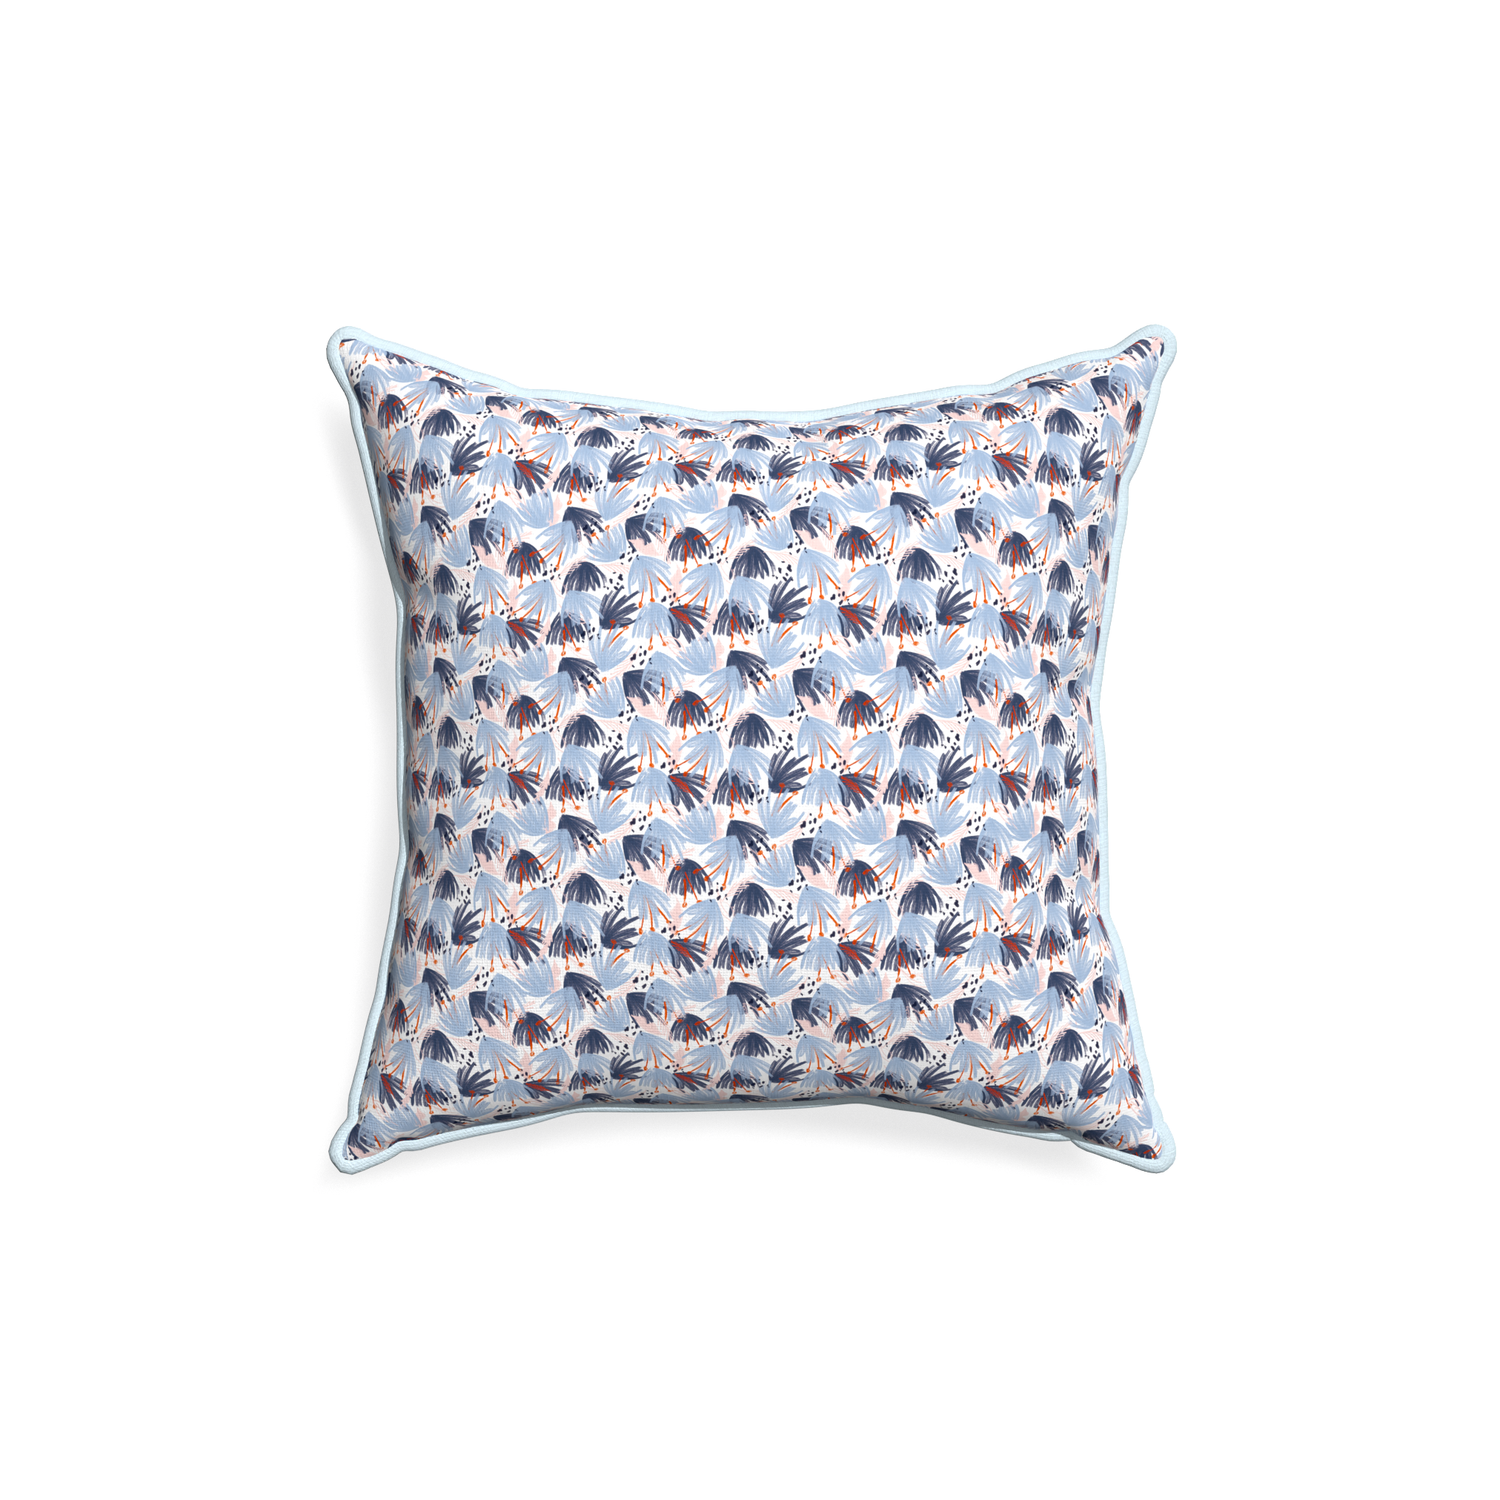 18-square eden blue custom pillow with powder piping on white background